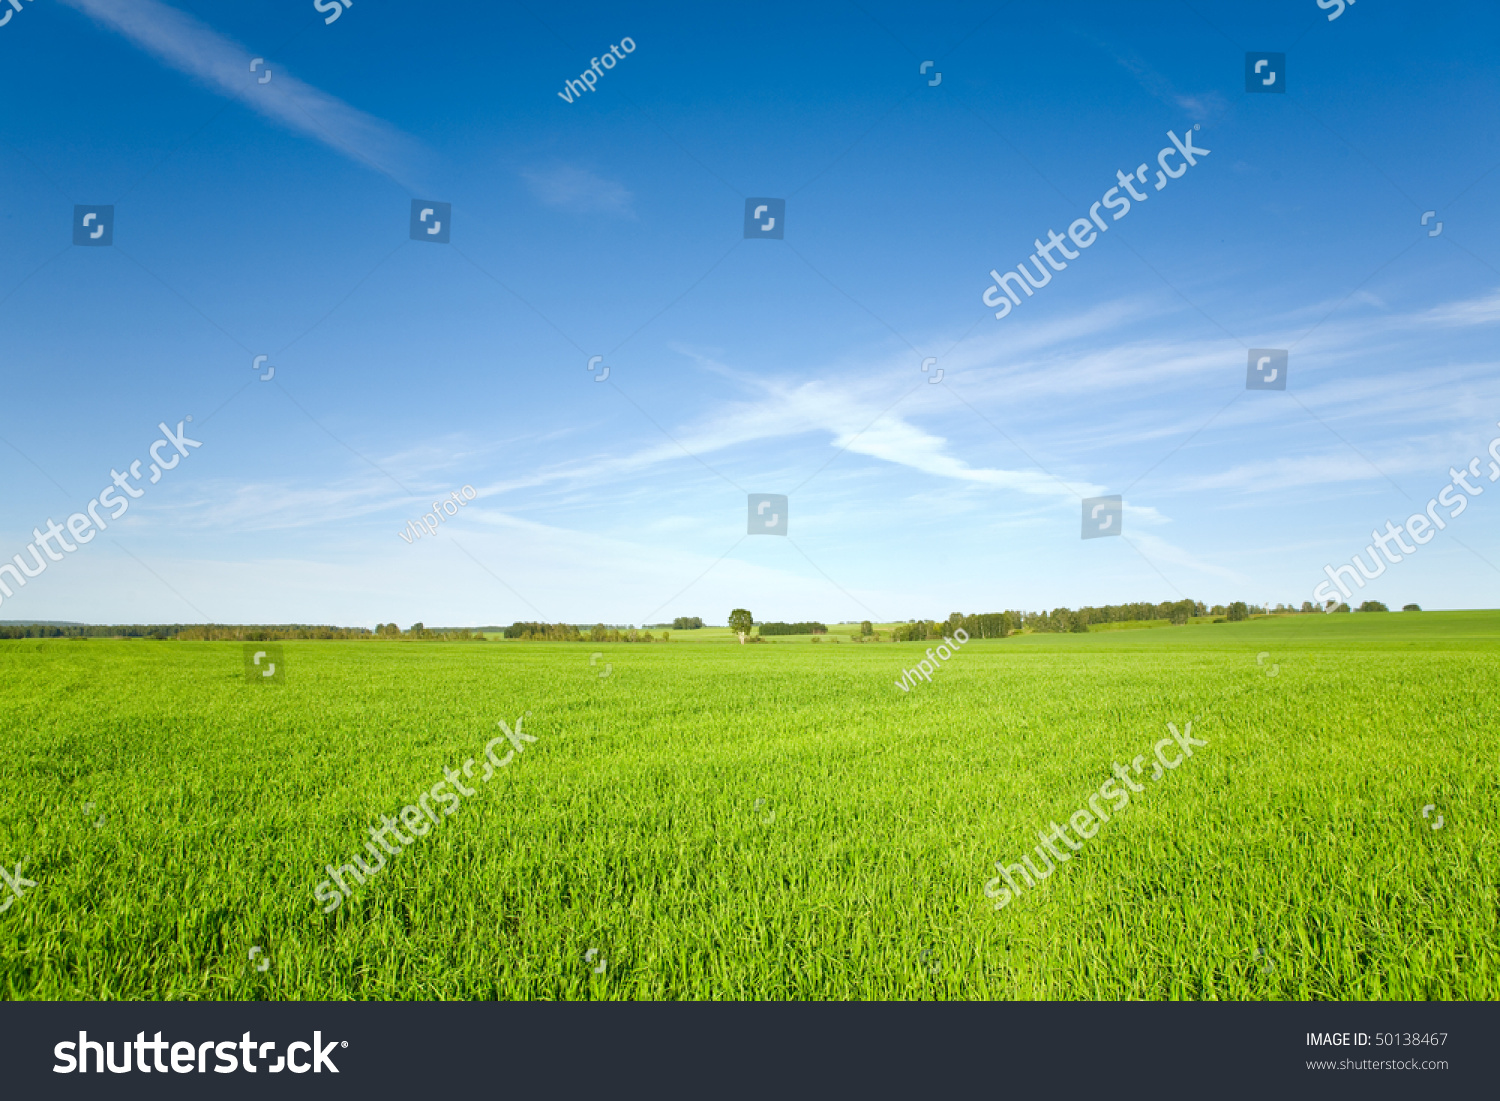 beautiful spring landscape and cloudy sky #50138467